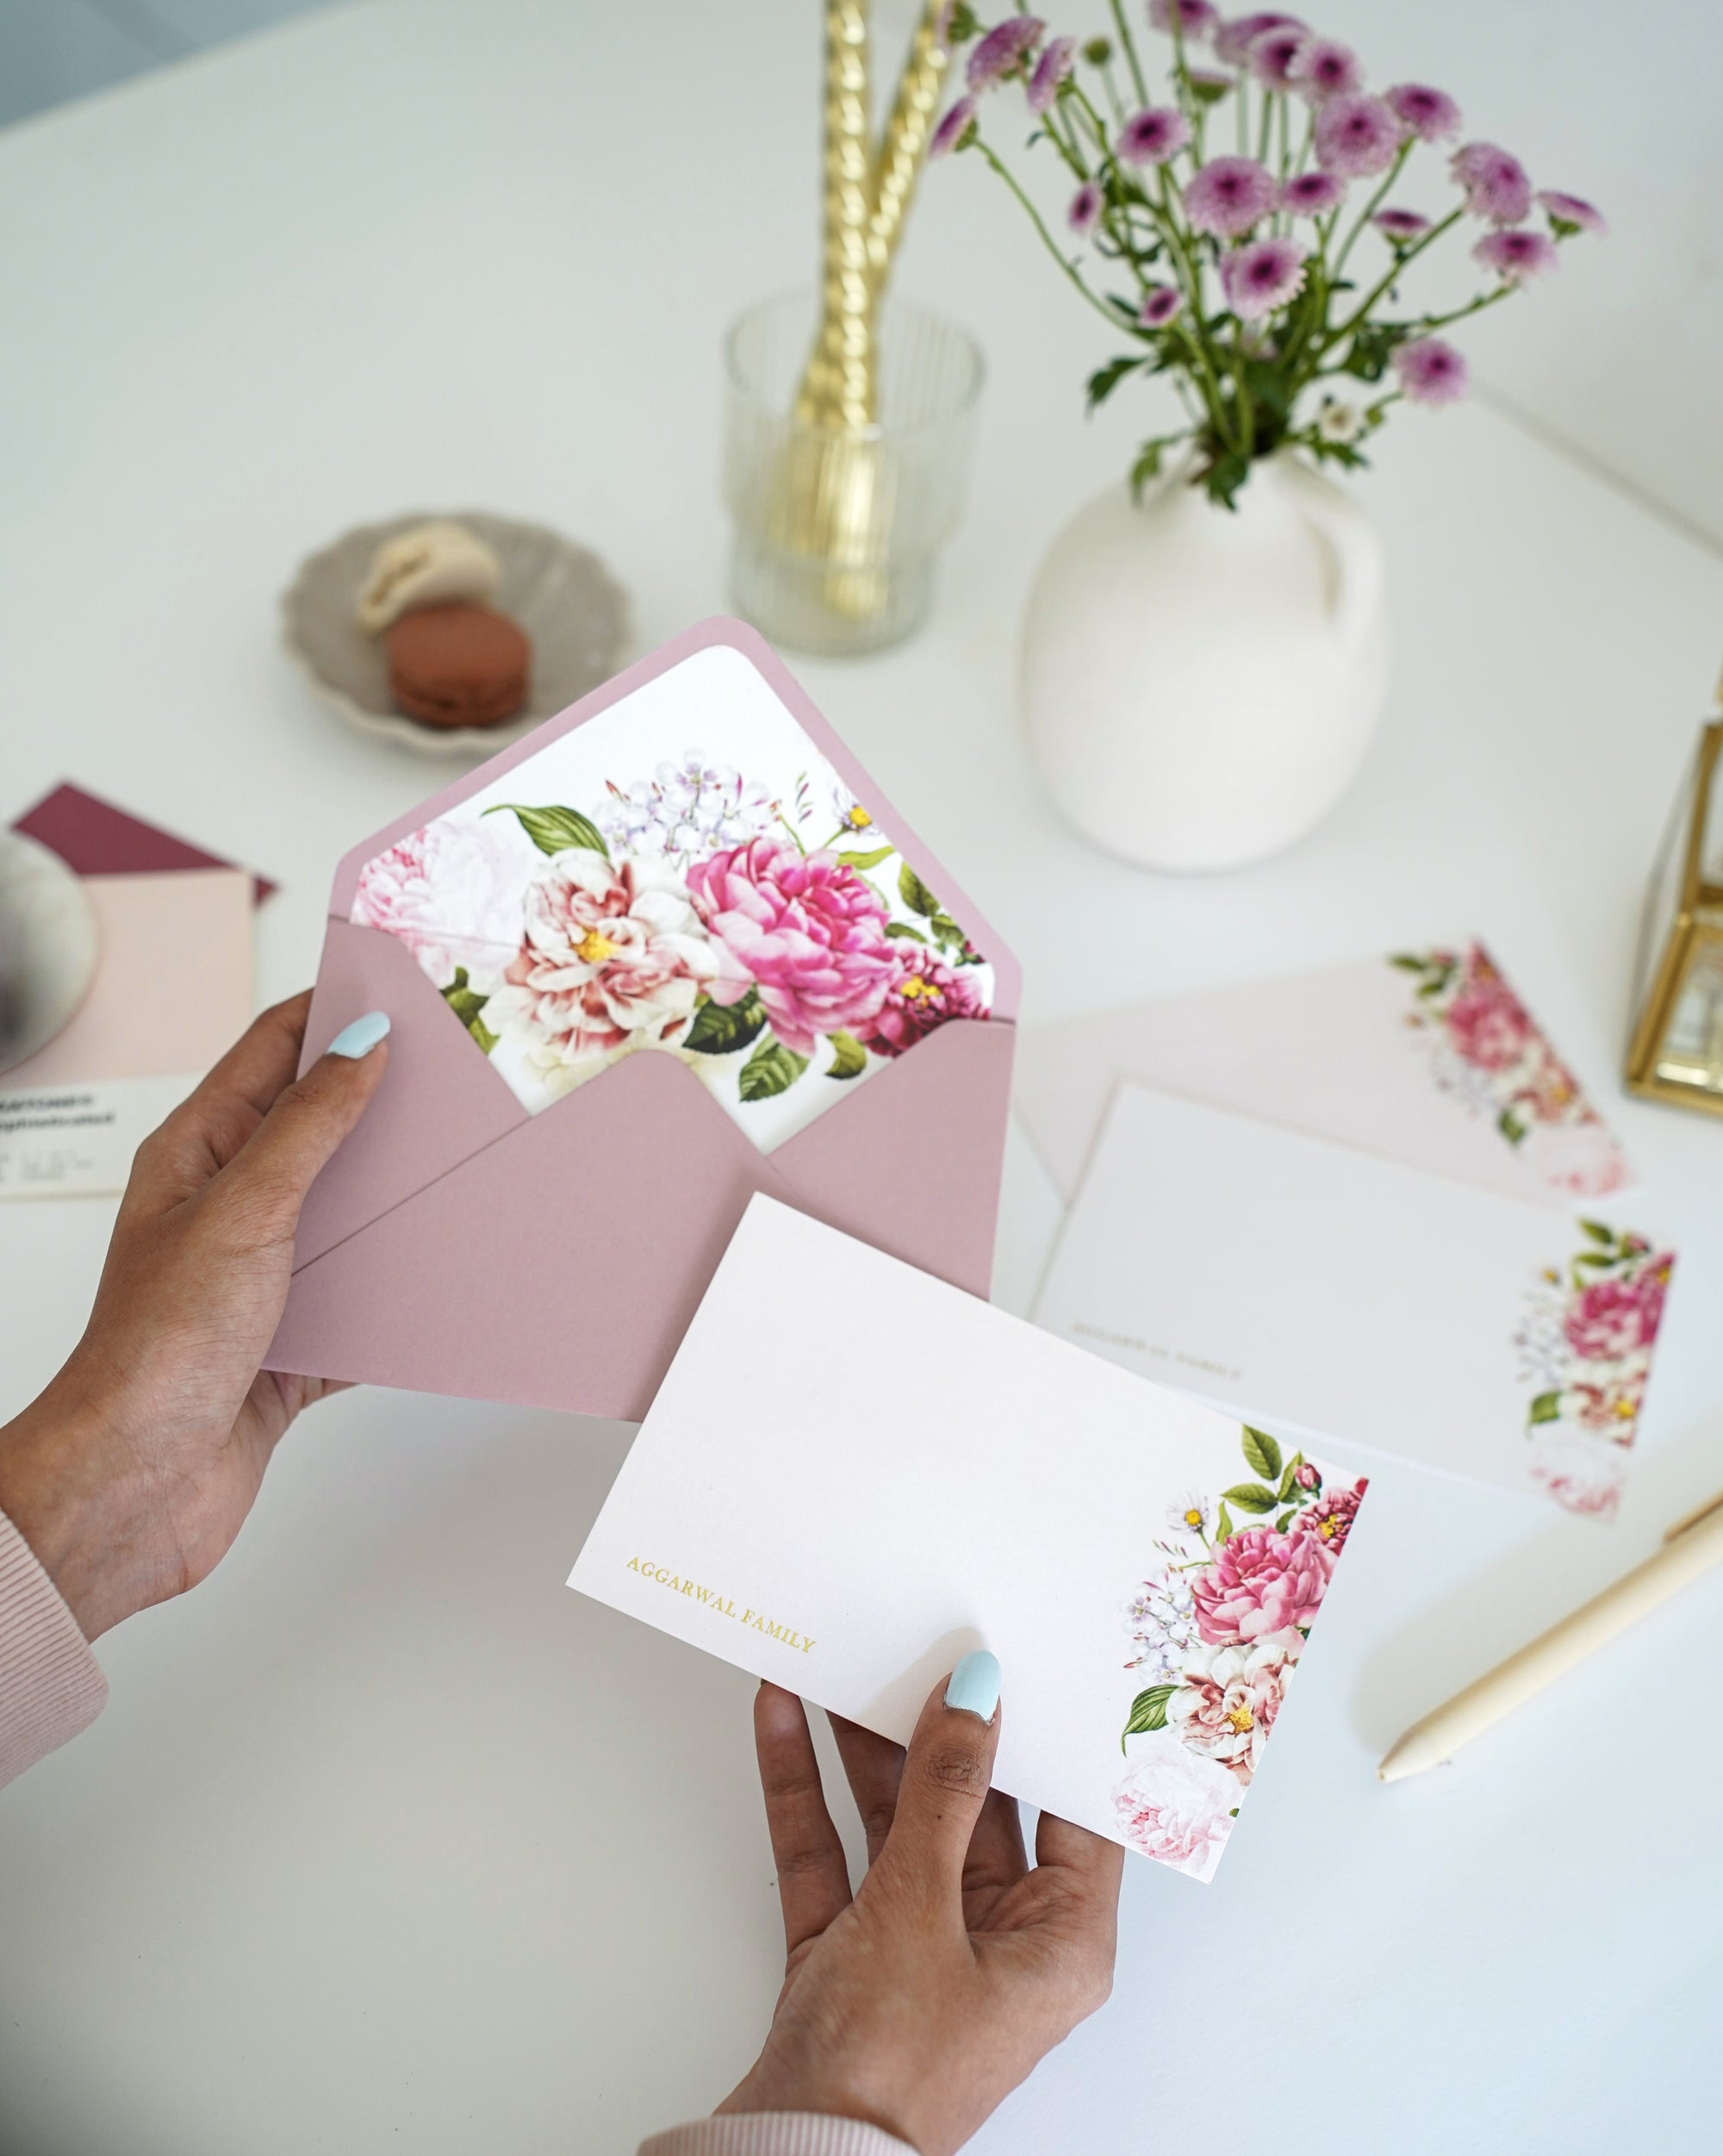  buy personalized notecards online, personalized notecards, custom notecards stationery sets, sorry card, note, love note, bulk order, birthday cards